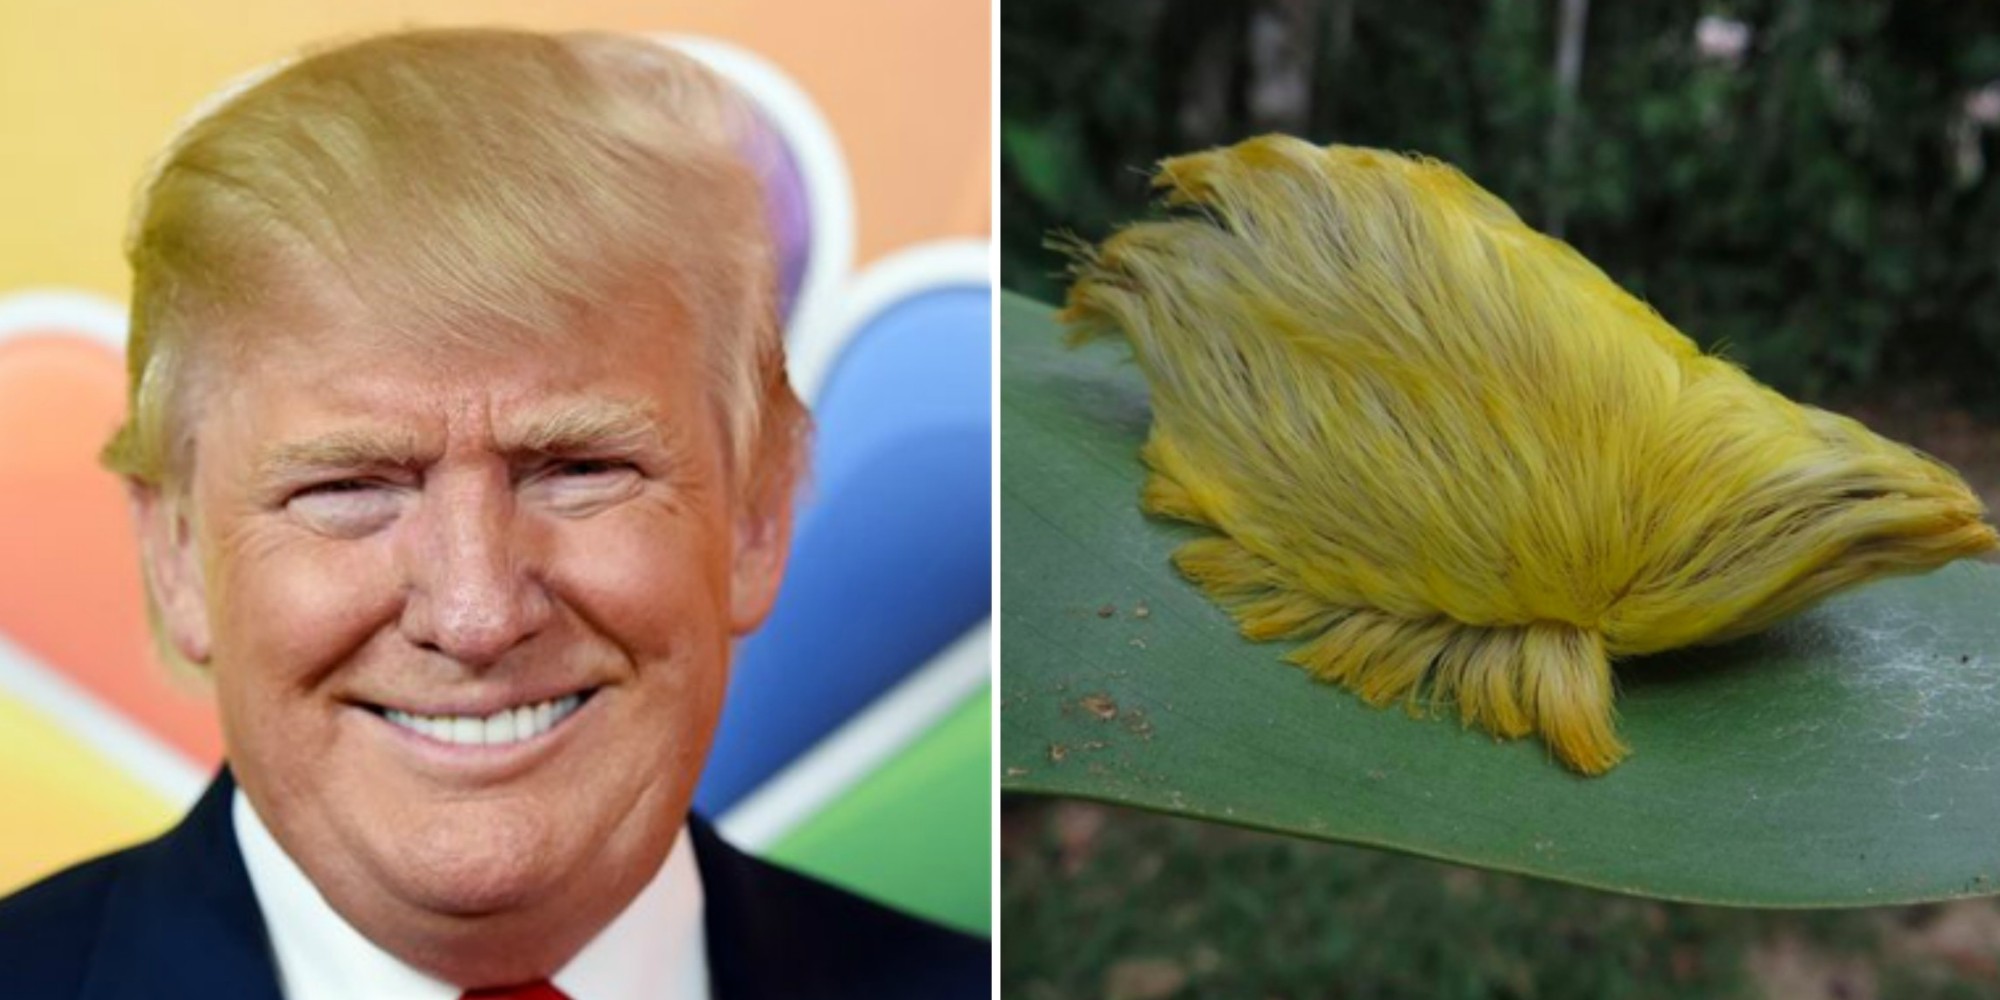 Donald Trump Bad Hair donald trump is running for president. here are 